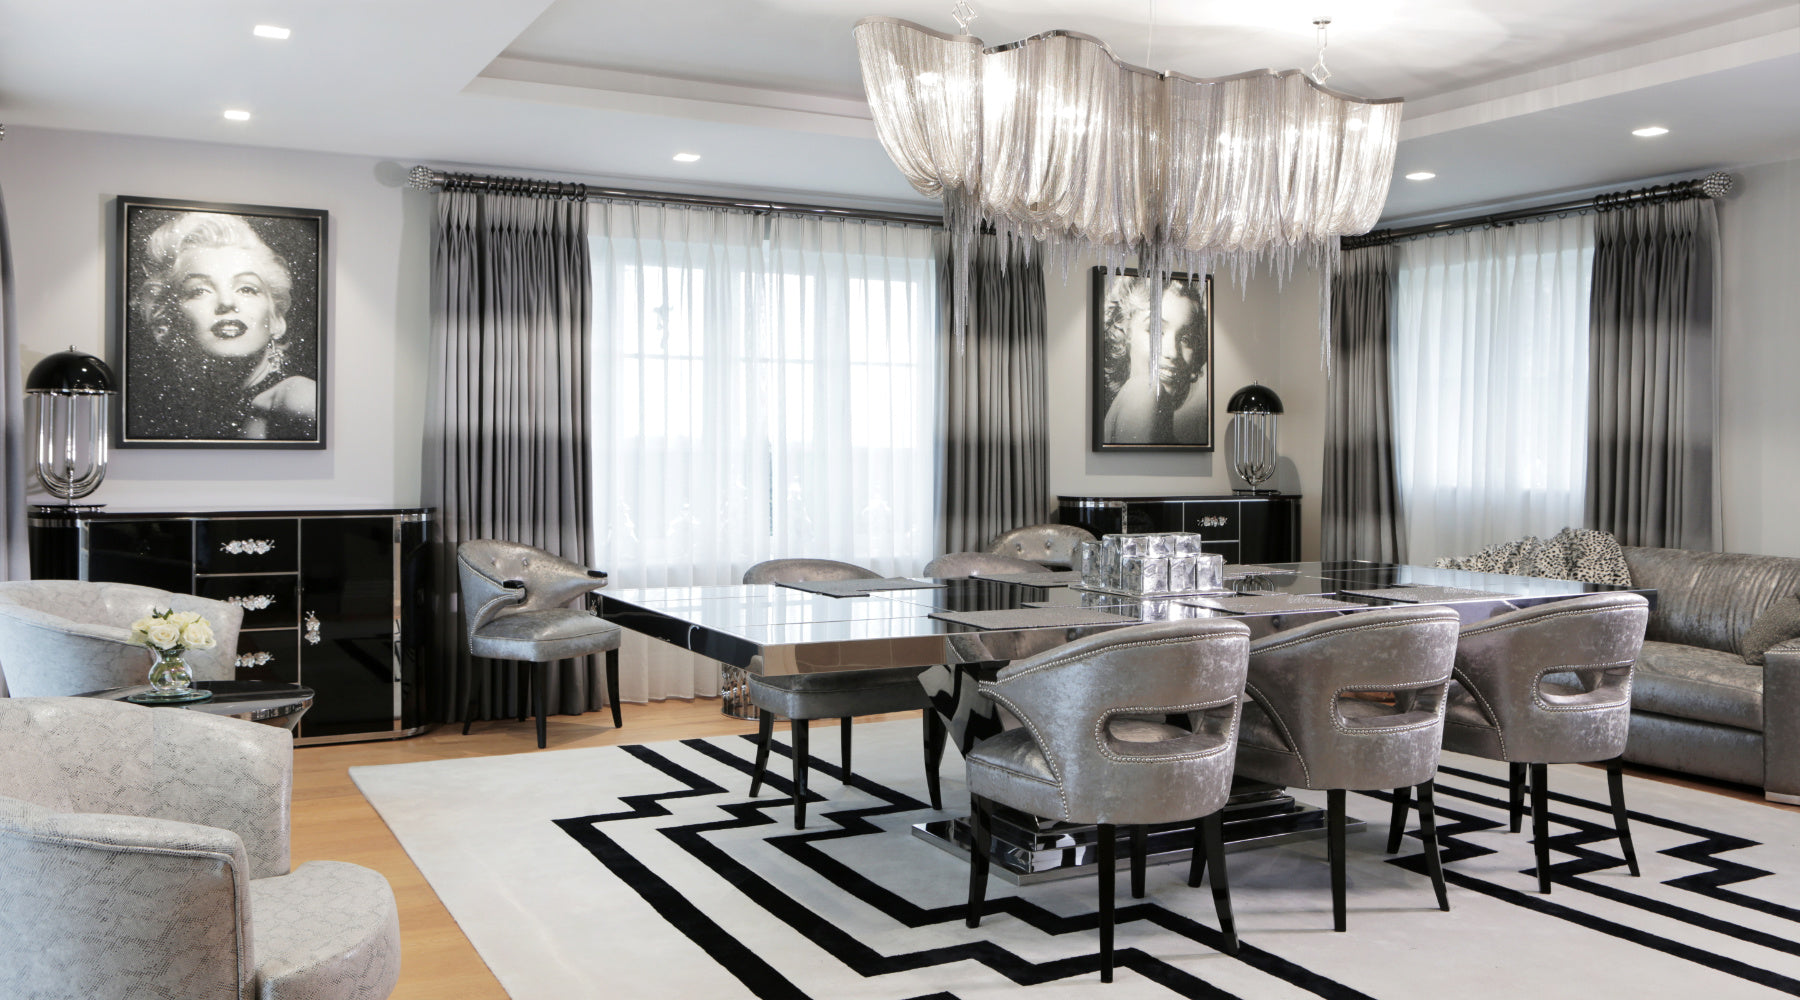 Harbury Country House - Our art-deco rock n’ roll chic dining room has been shortlisted!